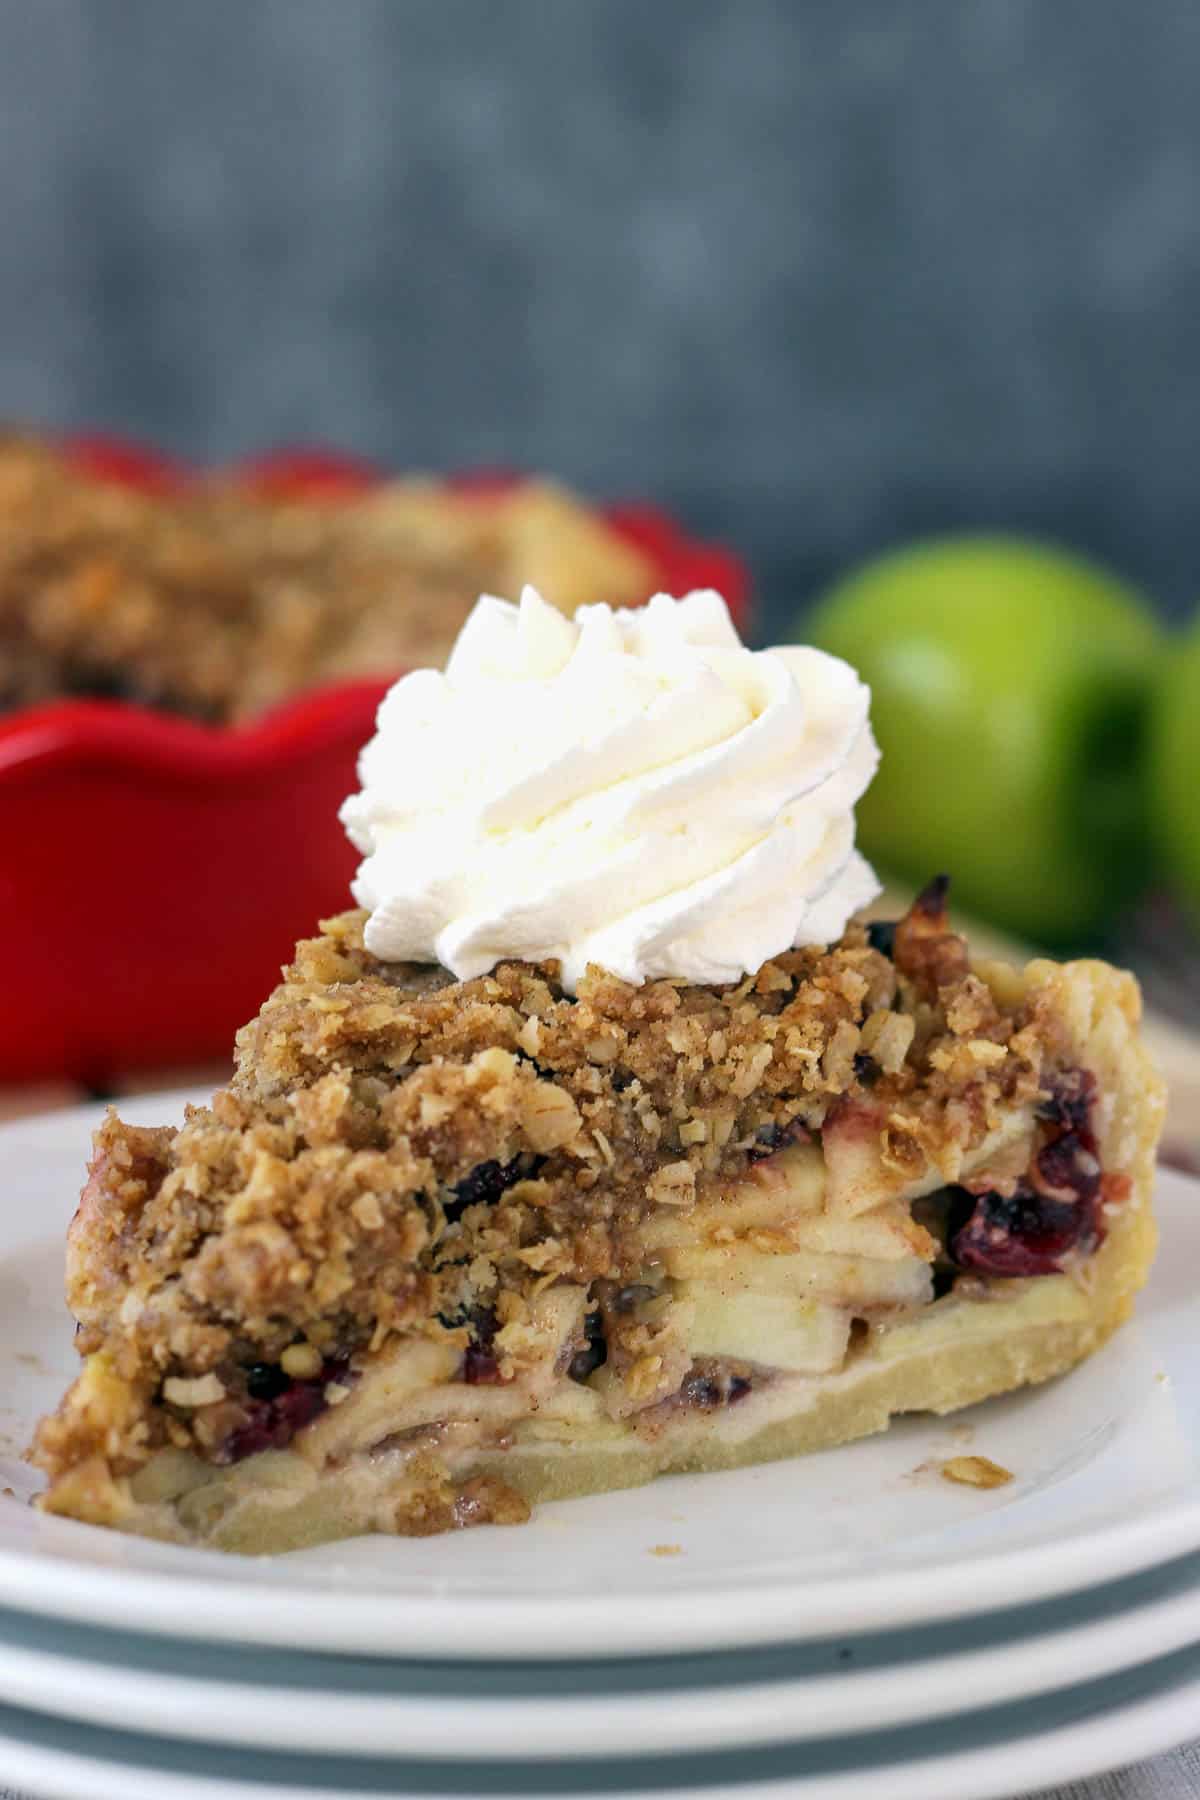 A slice of pie on a plate with whipped cream on top and fresh apples in the background